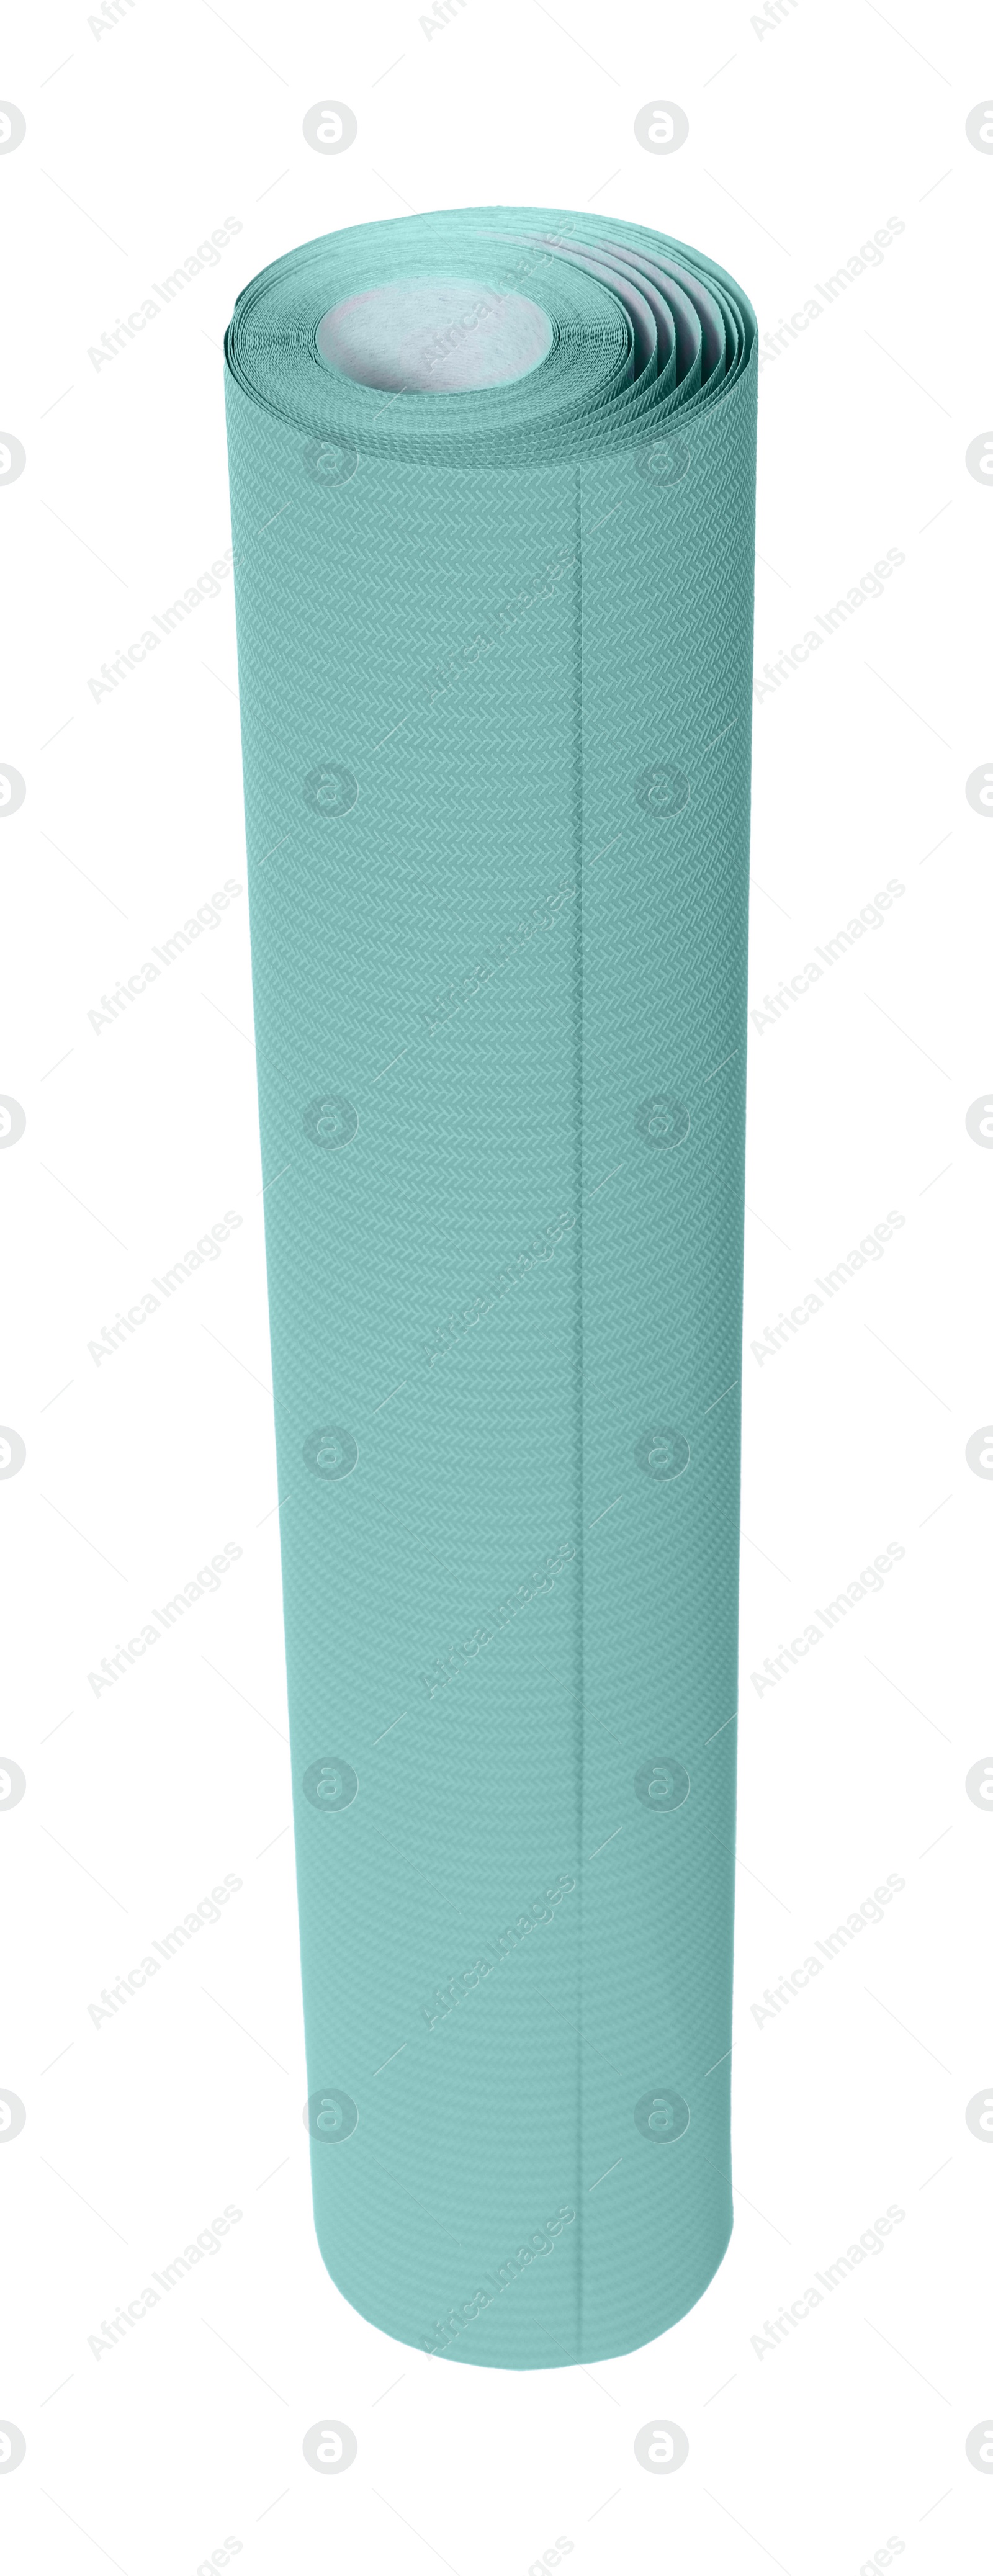 Image of One turquoise wallpaper roll isolated on white